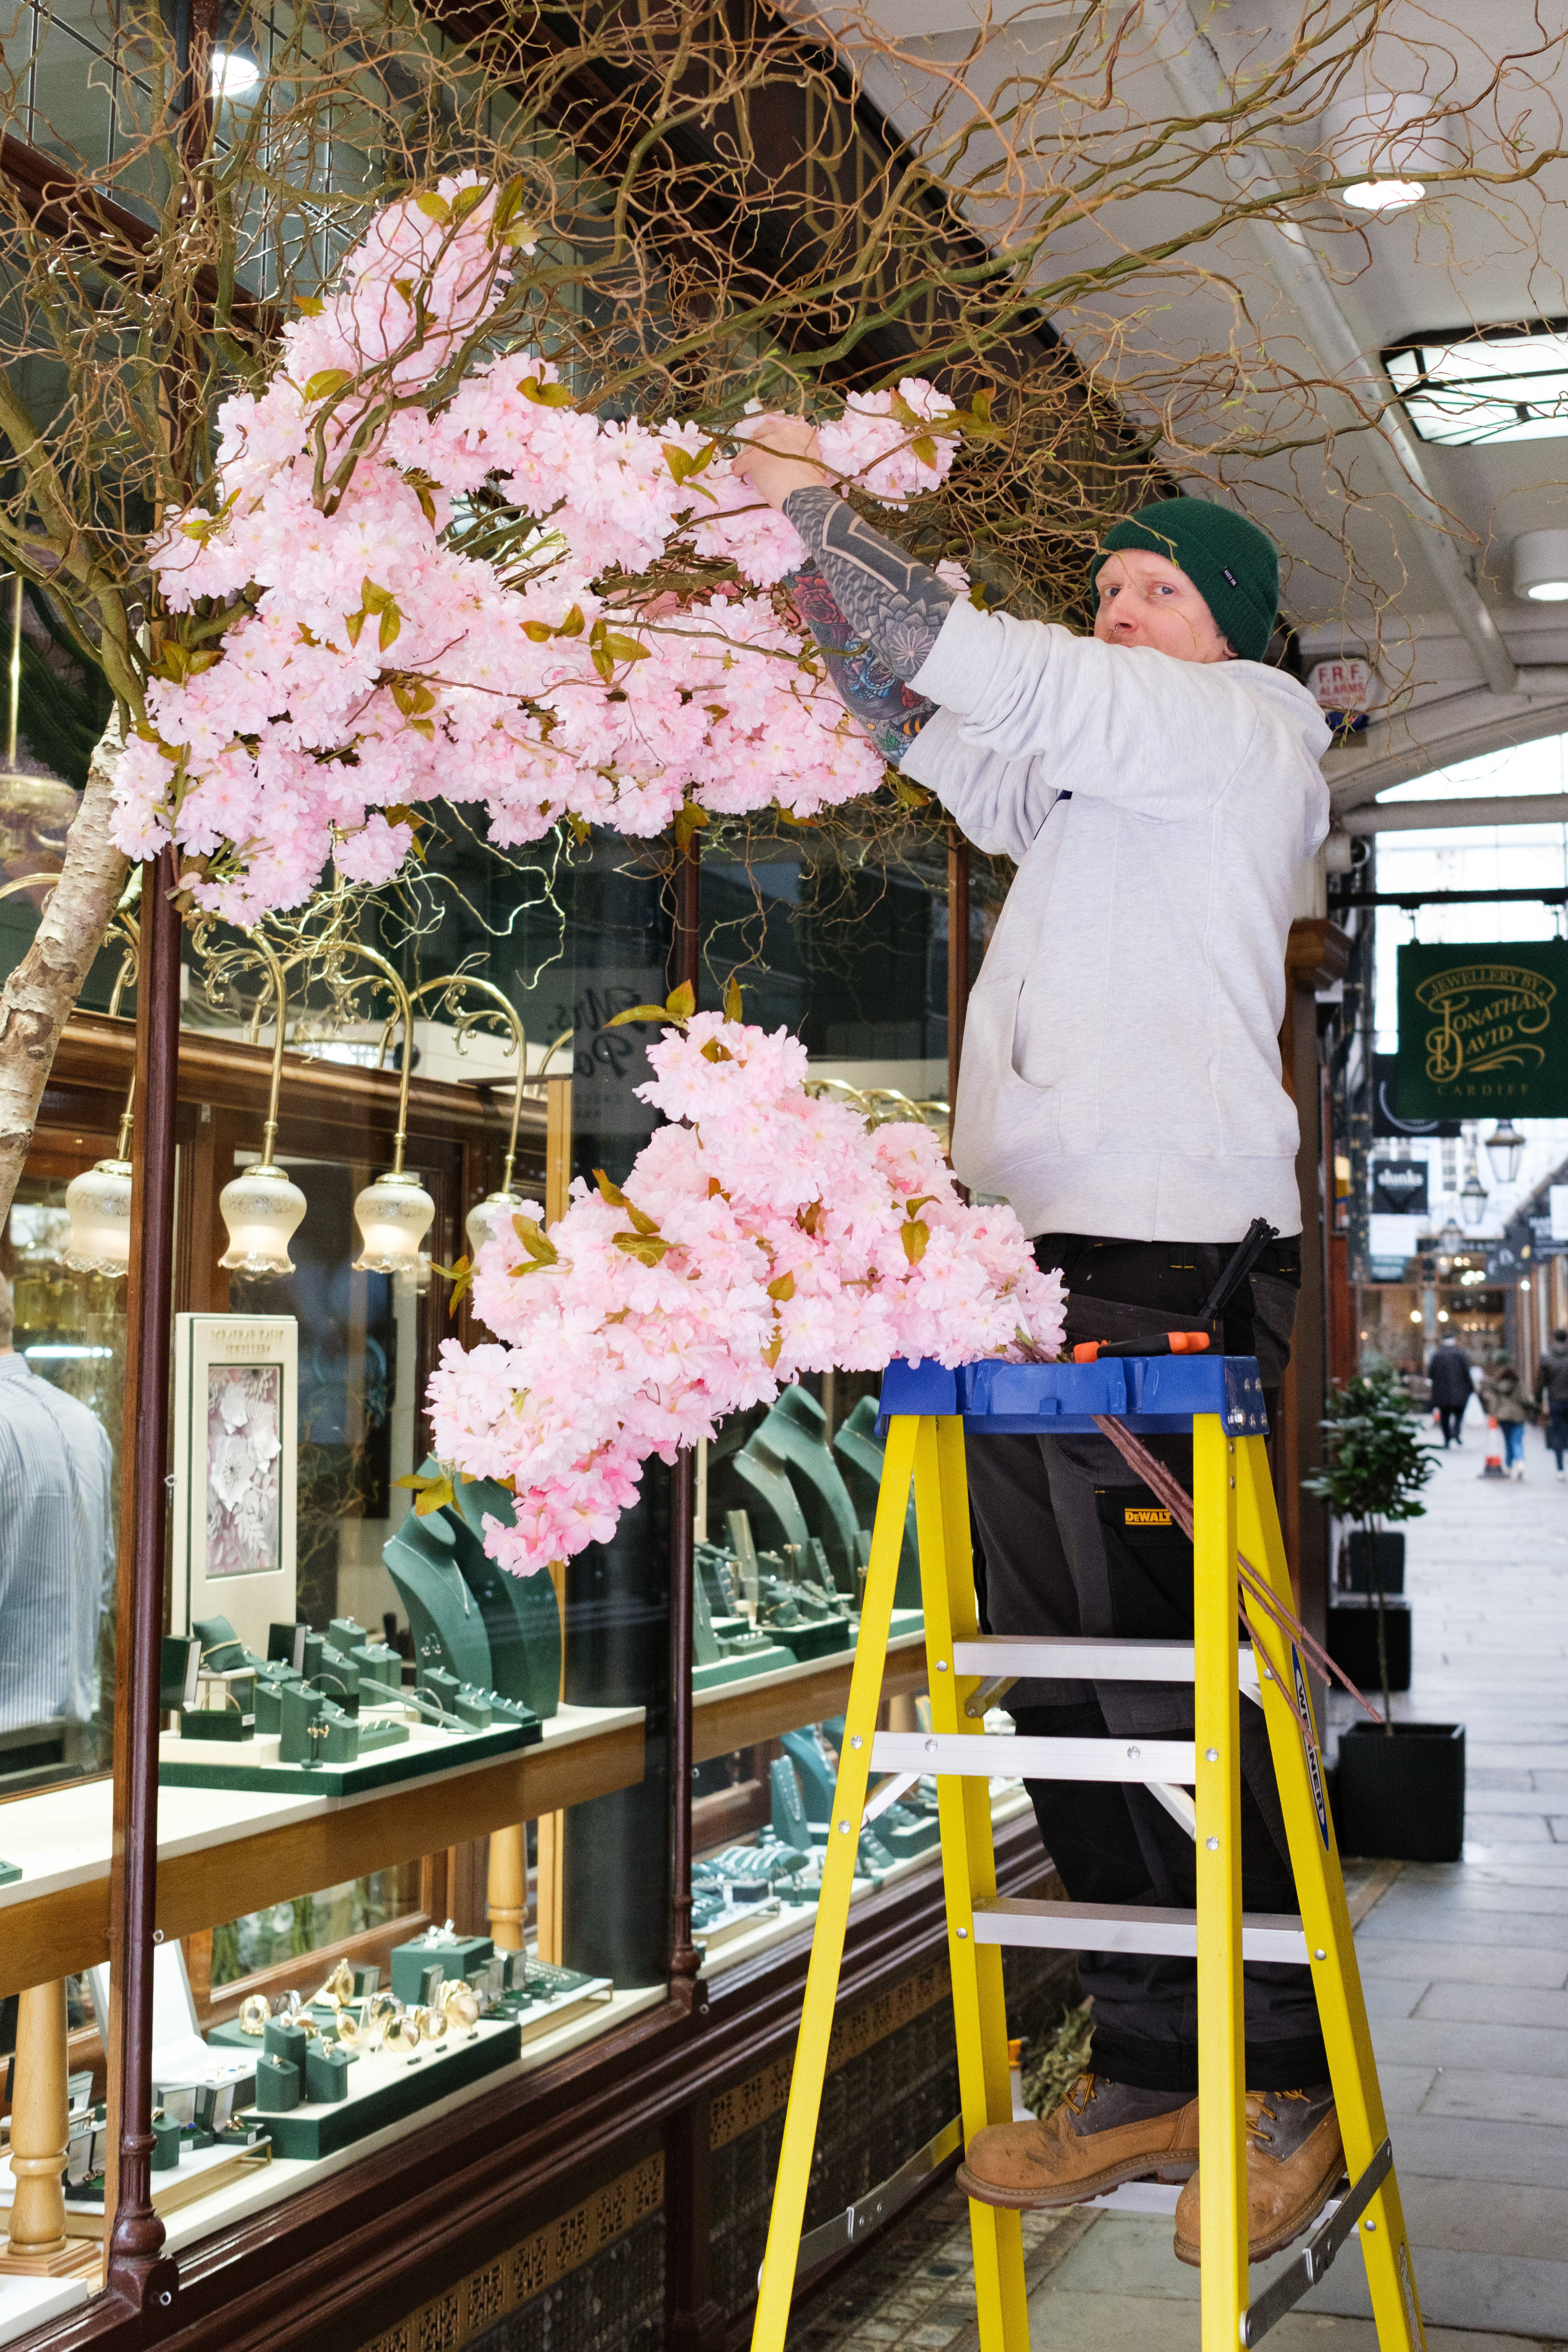 A photo of a person standing on a step ladder installing a pink-flowered tree onto the facade of a shop window.